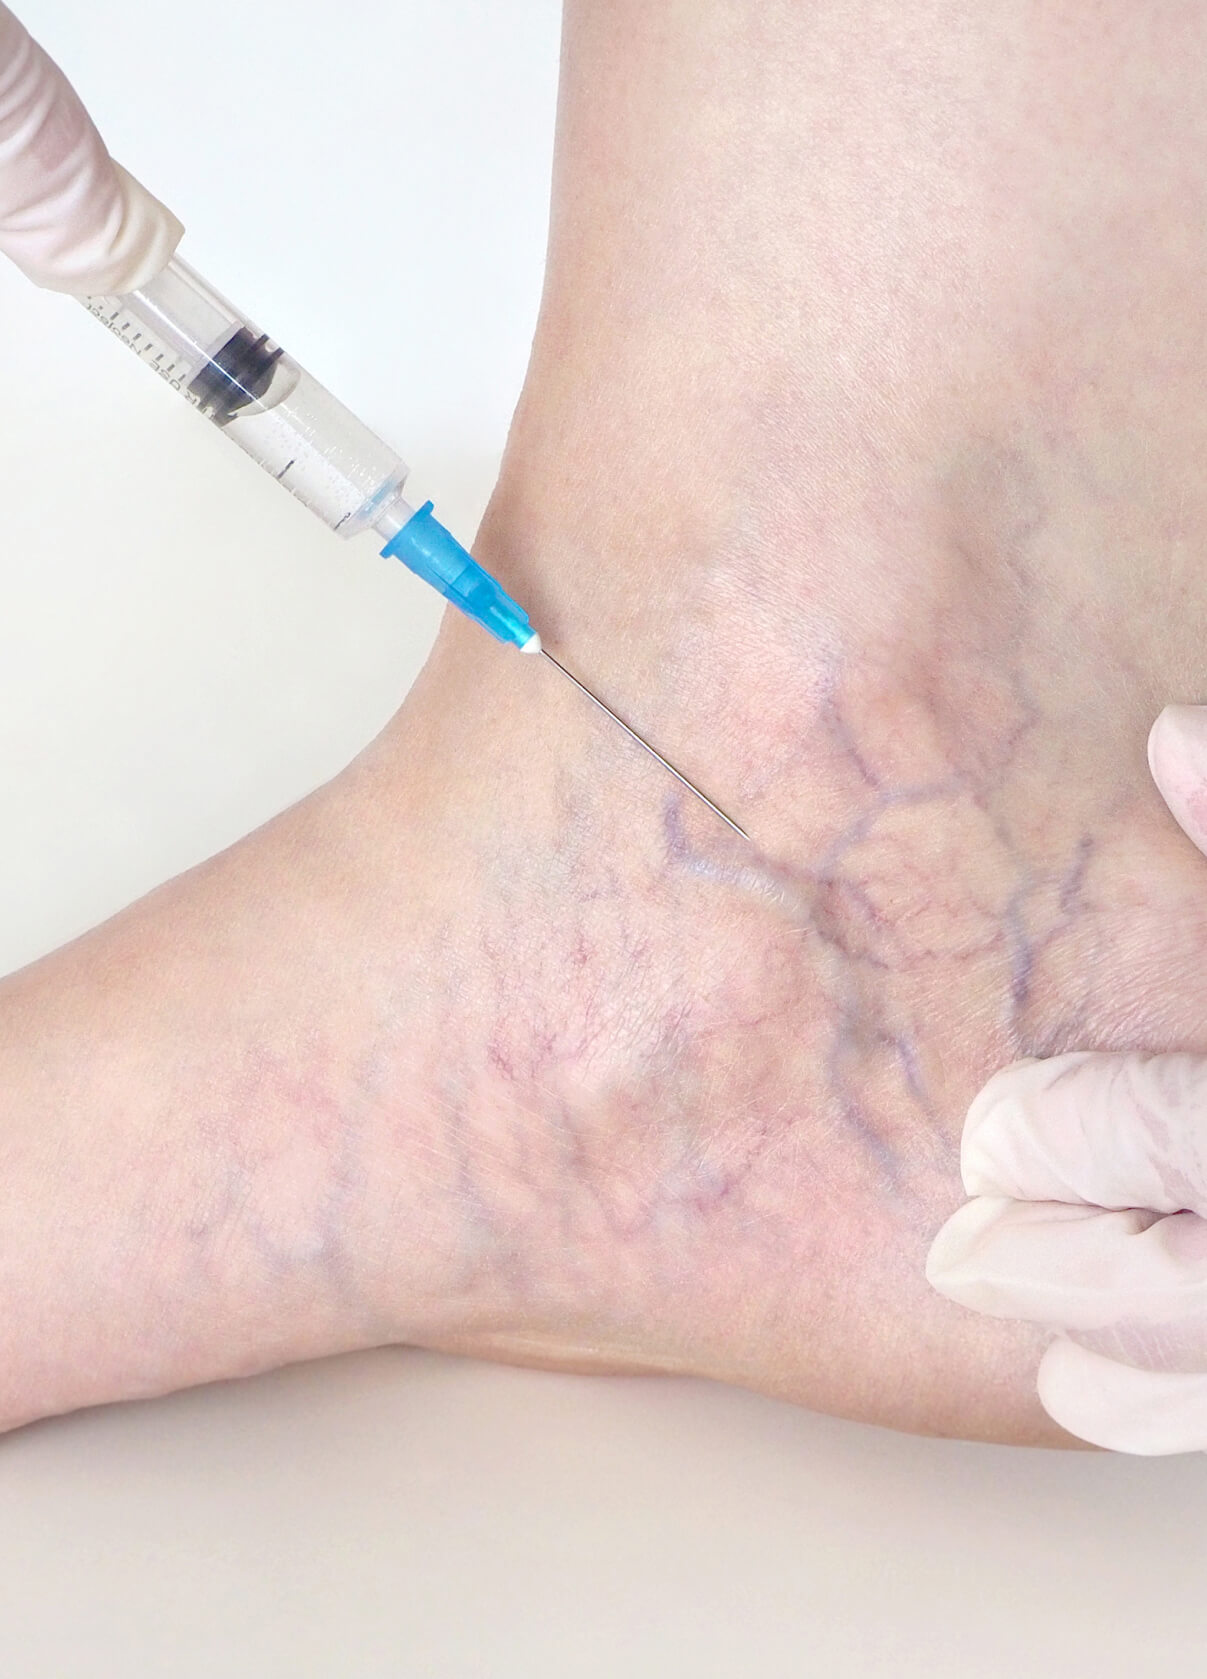 Sclerotherapy at Essential Asethetics for spider and varicose veins